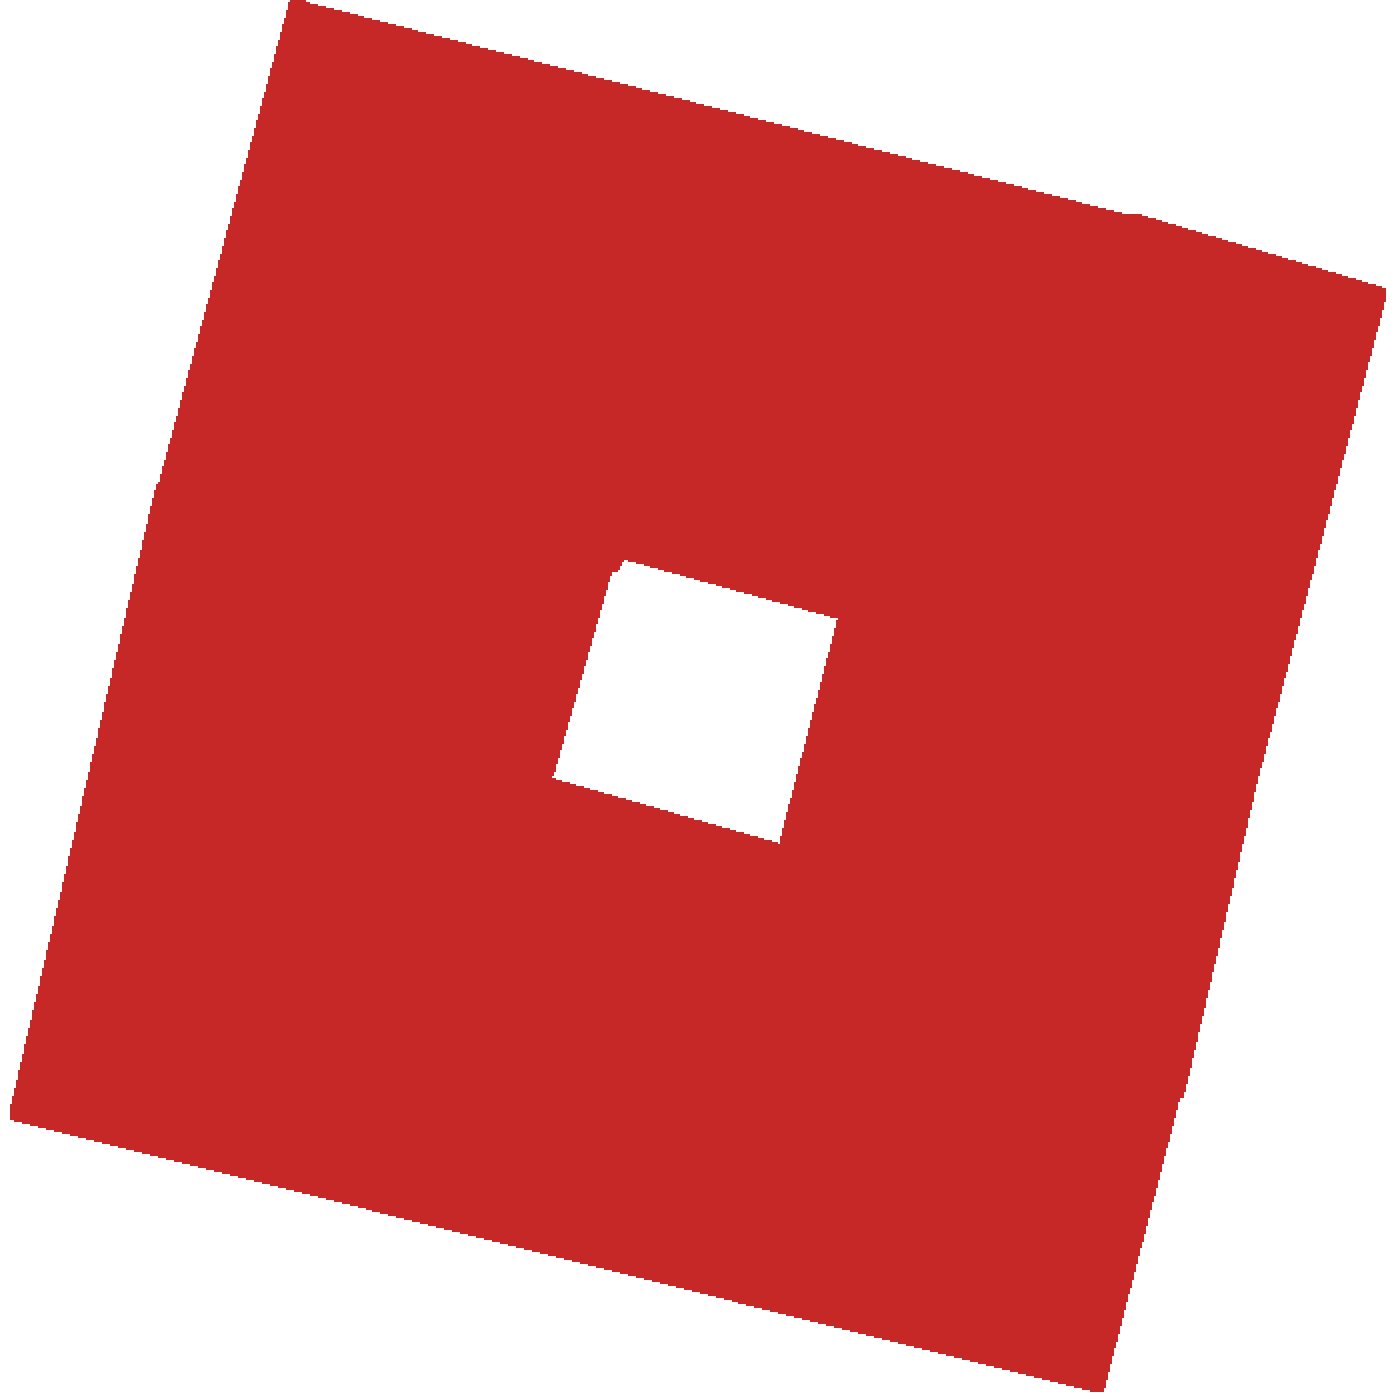 Roblox App Icon at Vectorified.com | Collection of Roblox App Icon free